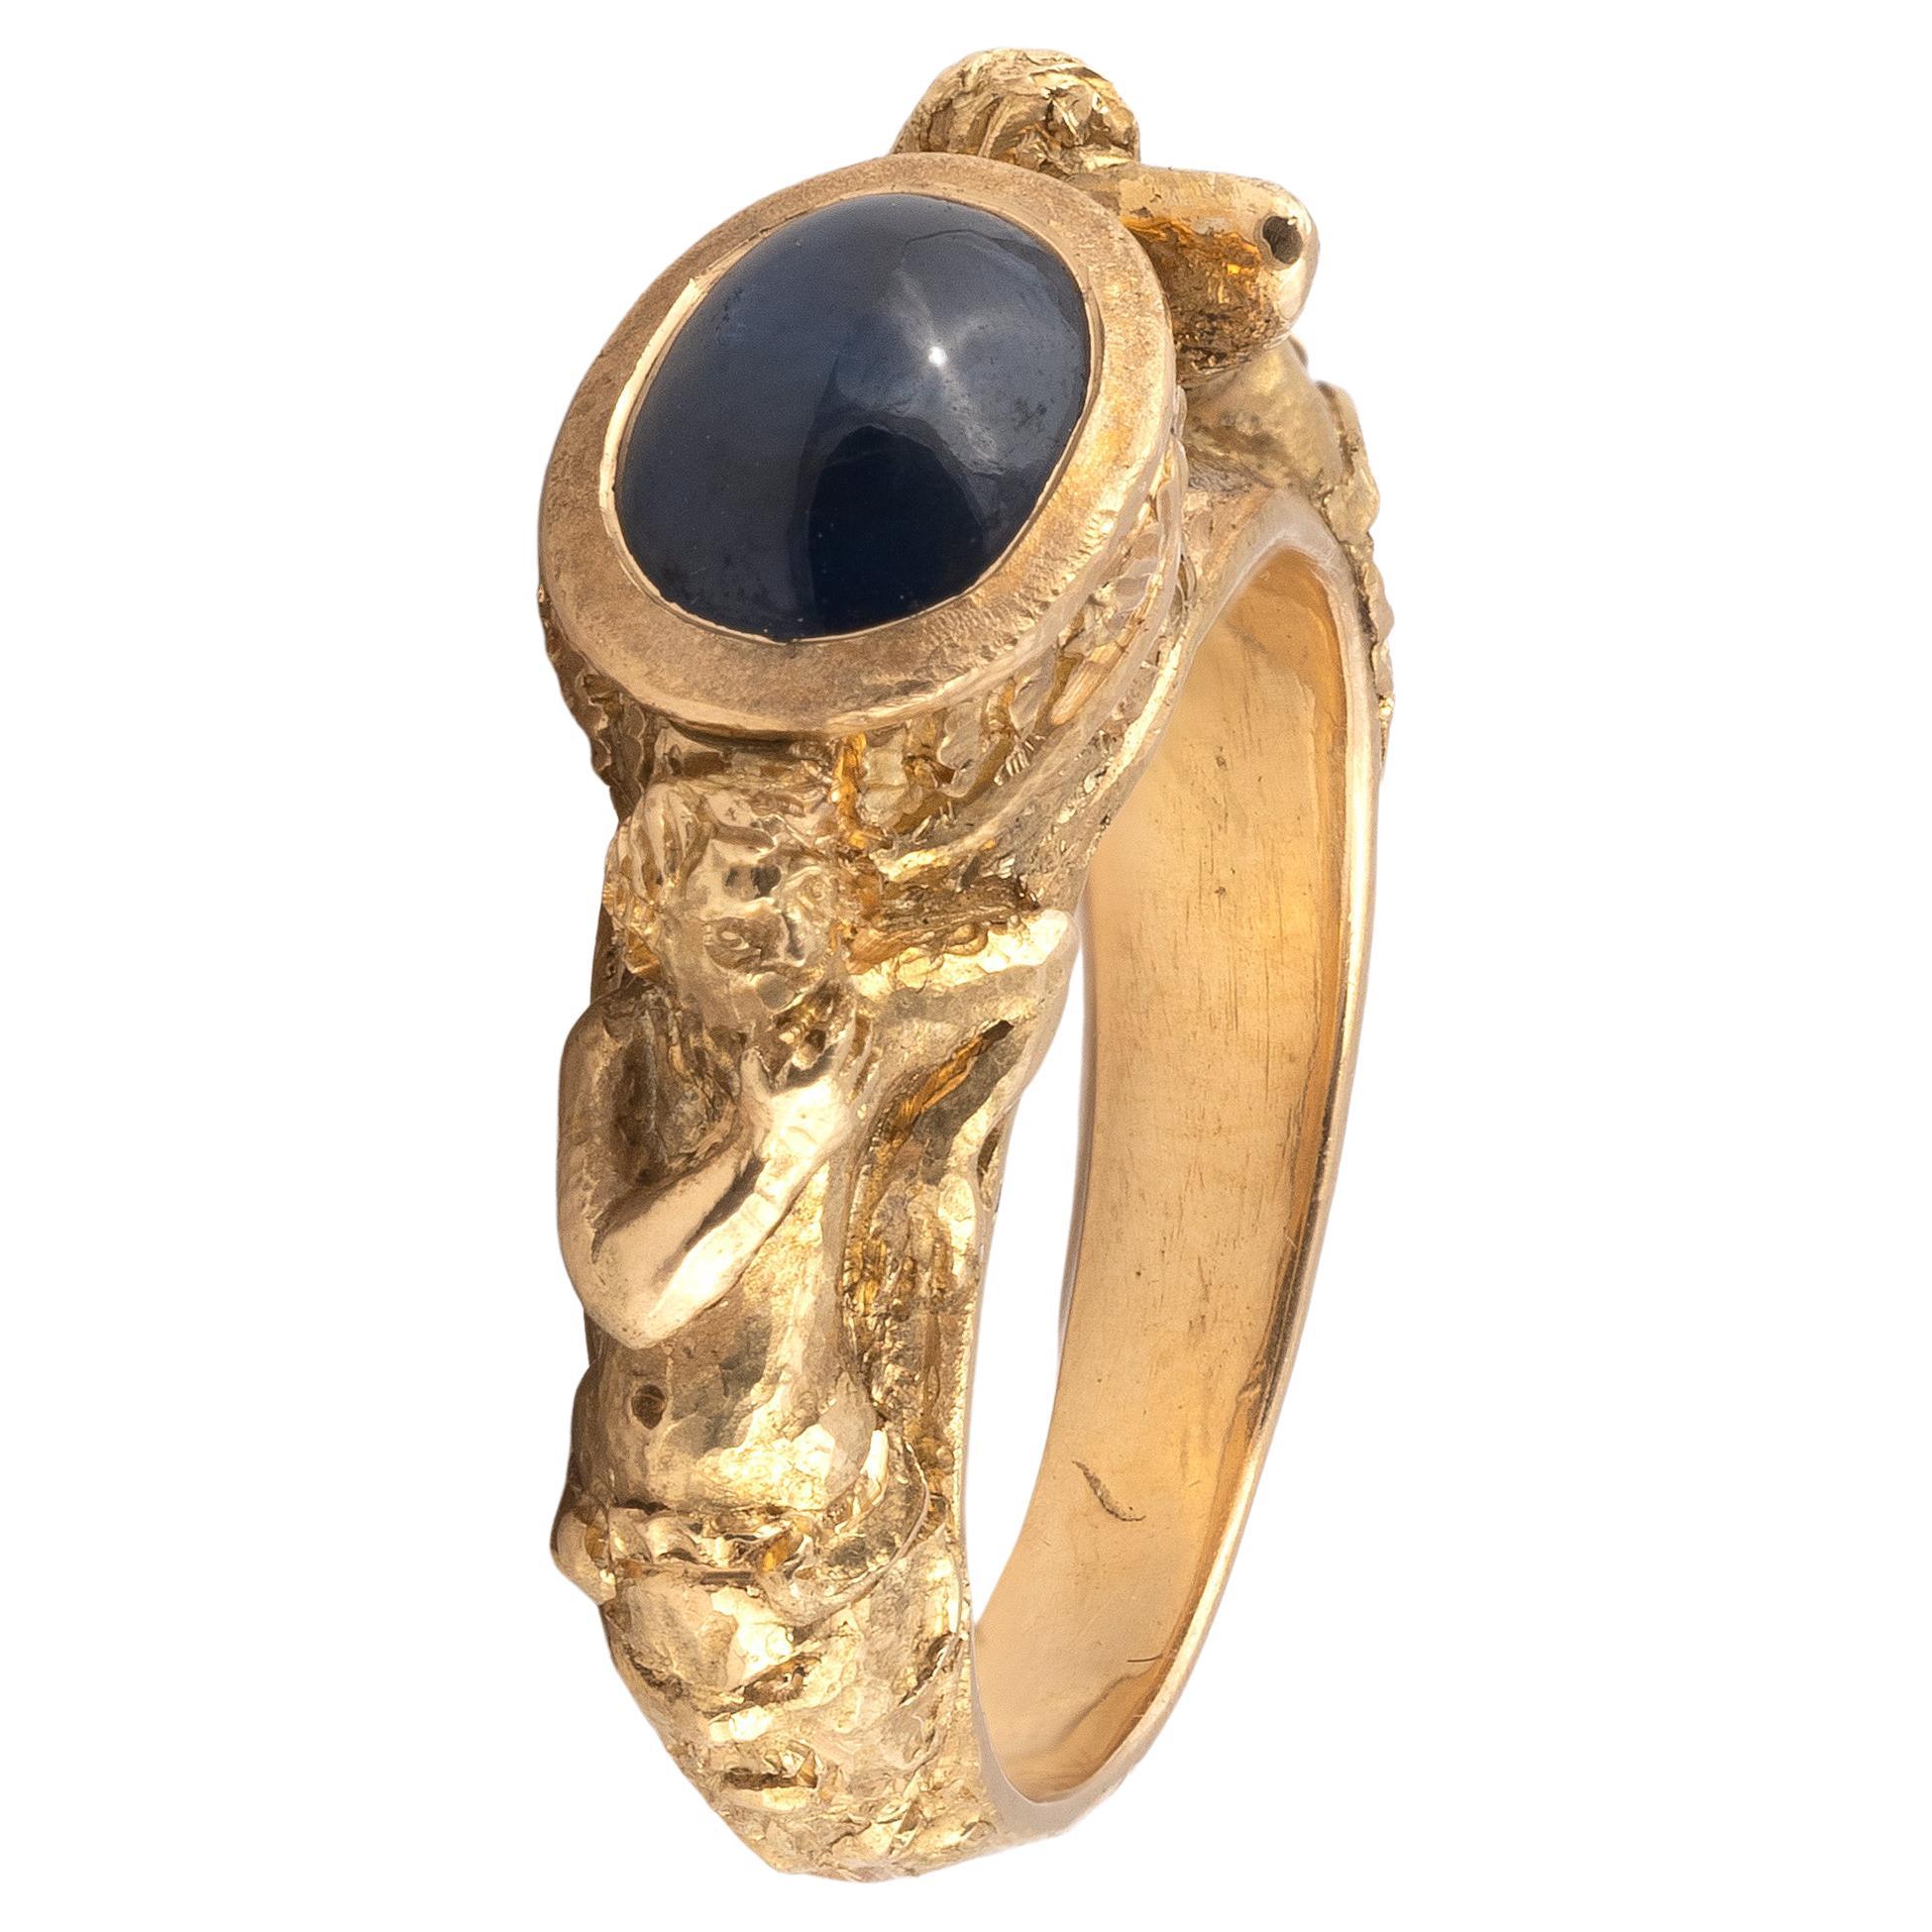 The hoop depicting a draped woman amongst foliage, her arm wrapped around a collet mounted cabochon sapphire cased.
Size 7
Weight: 13,70gr.
